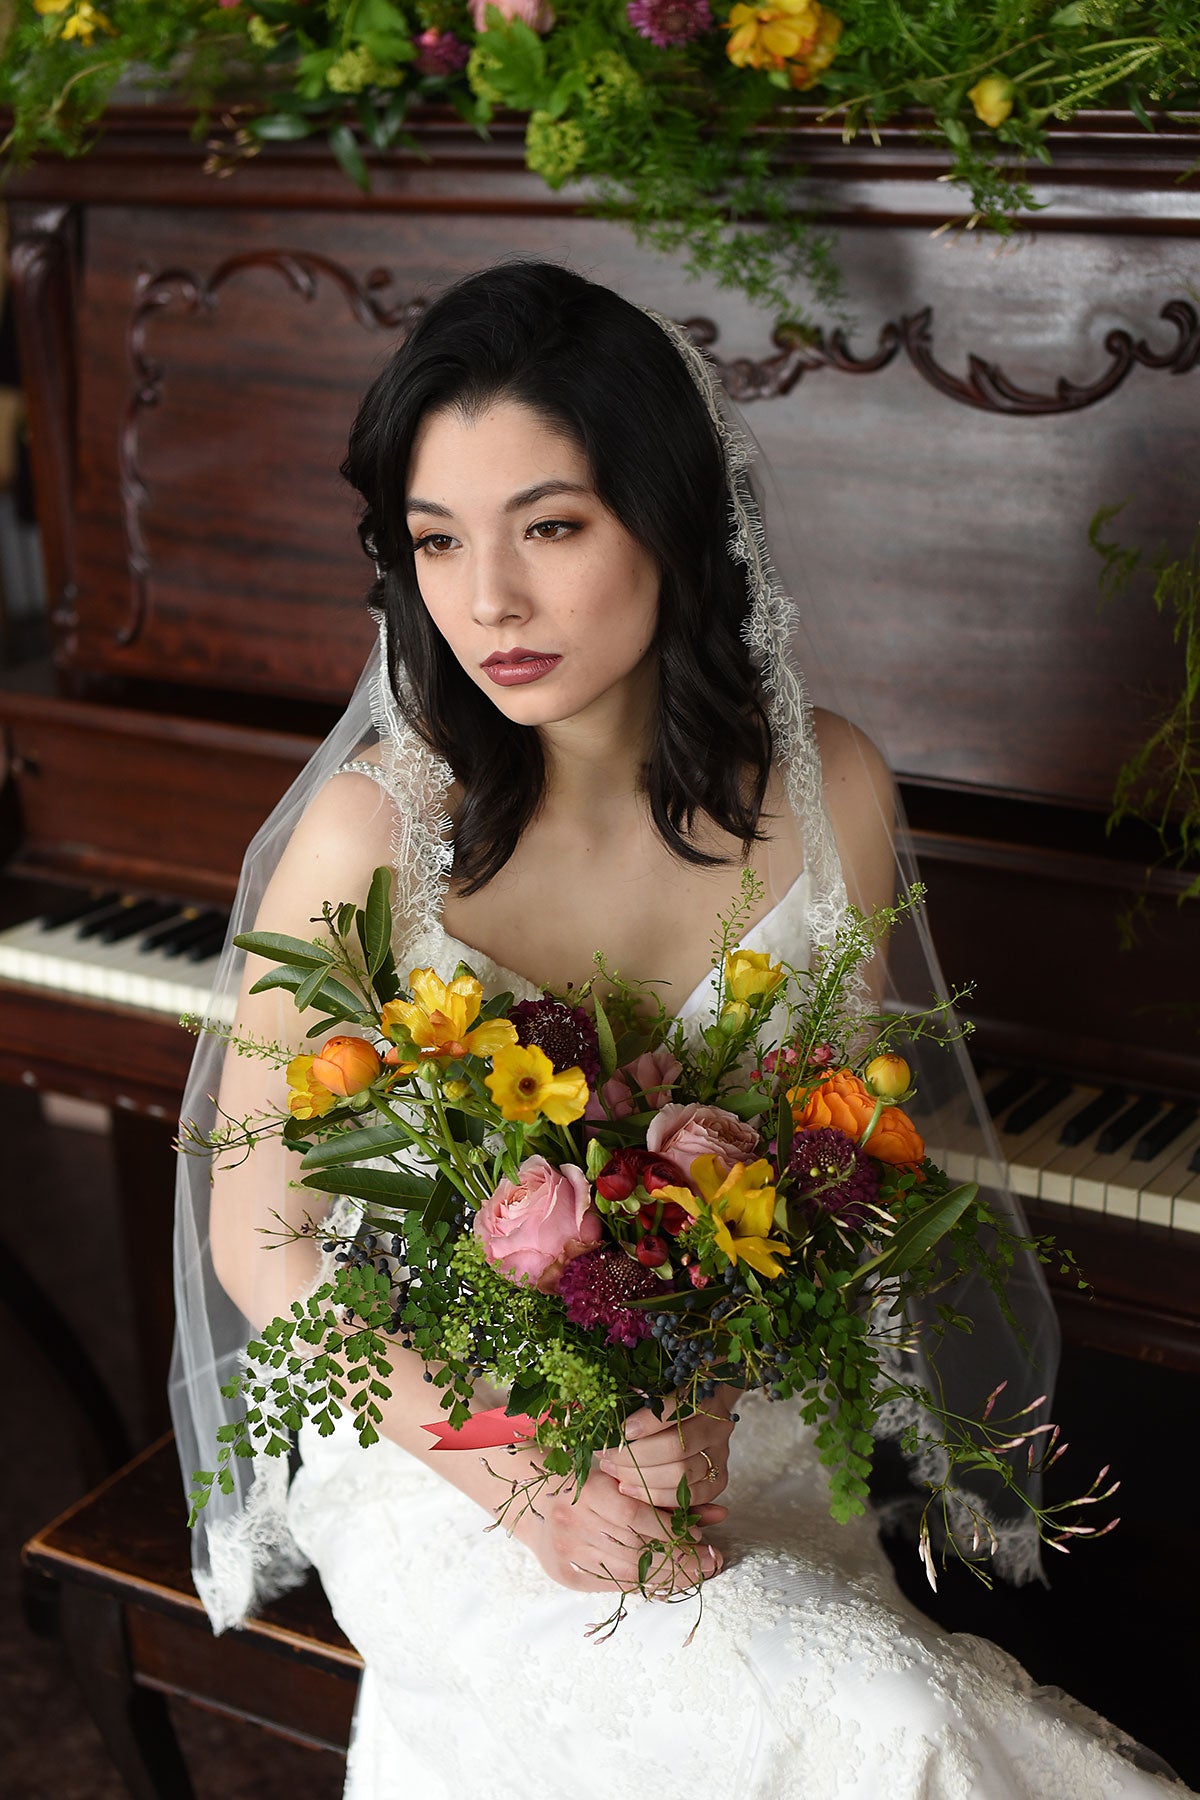 bride wearing lace veil and holding a flower bouquet 